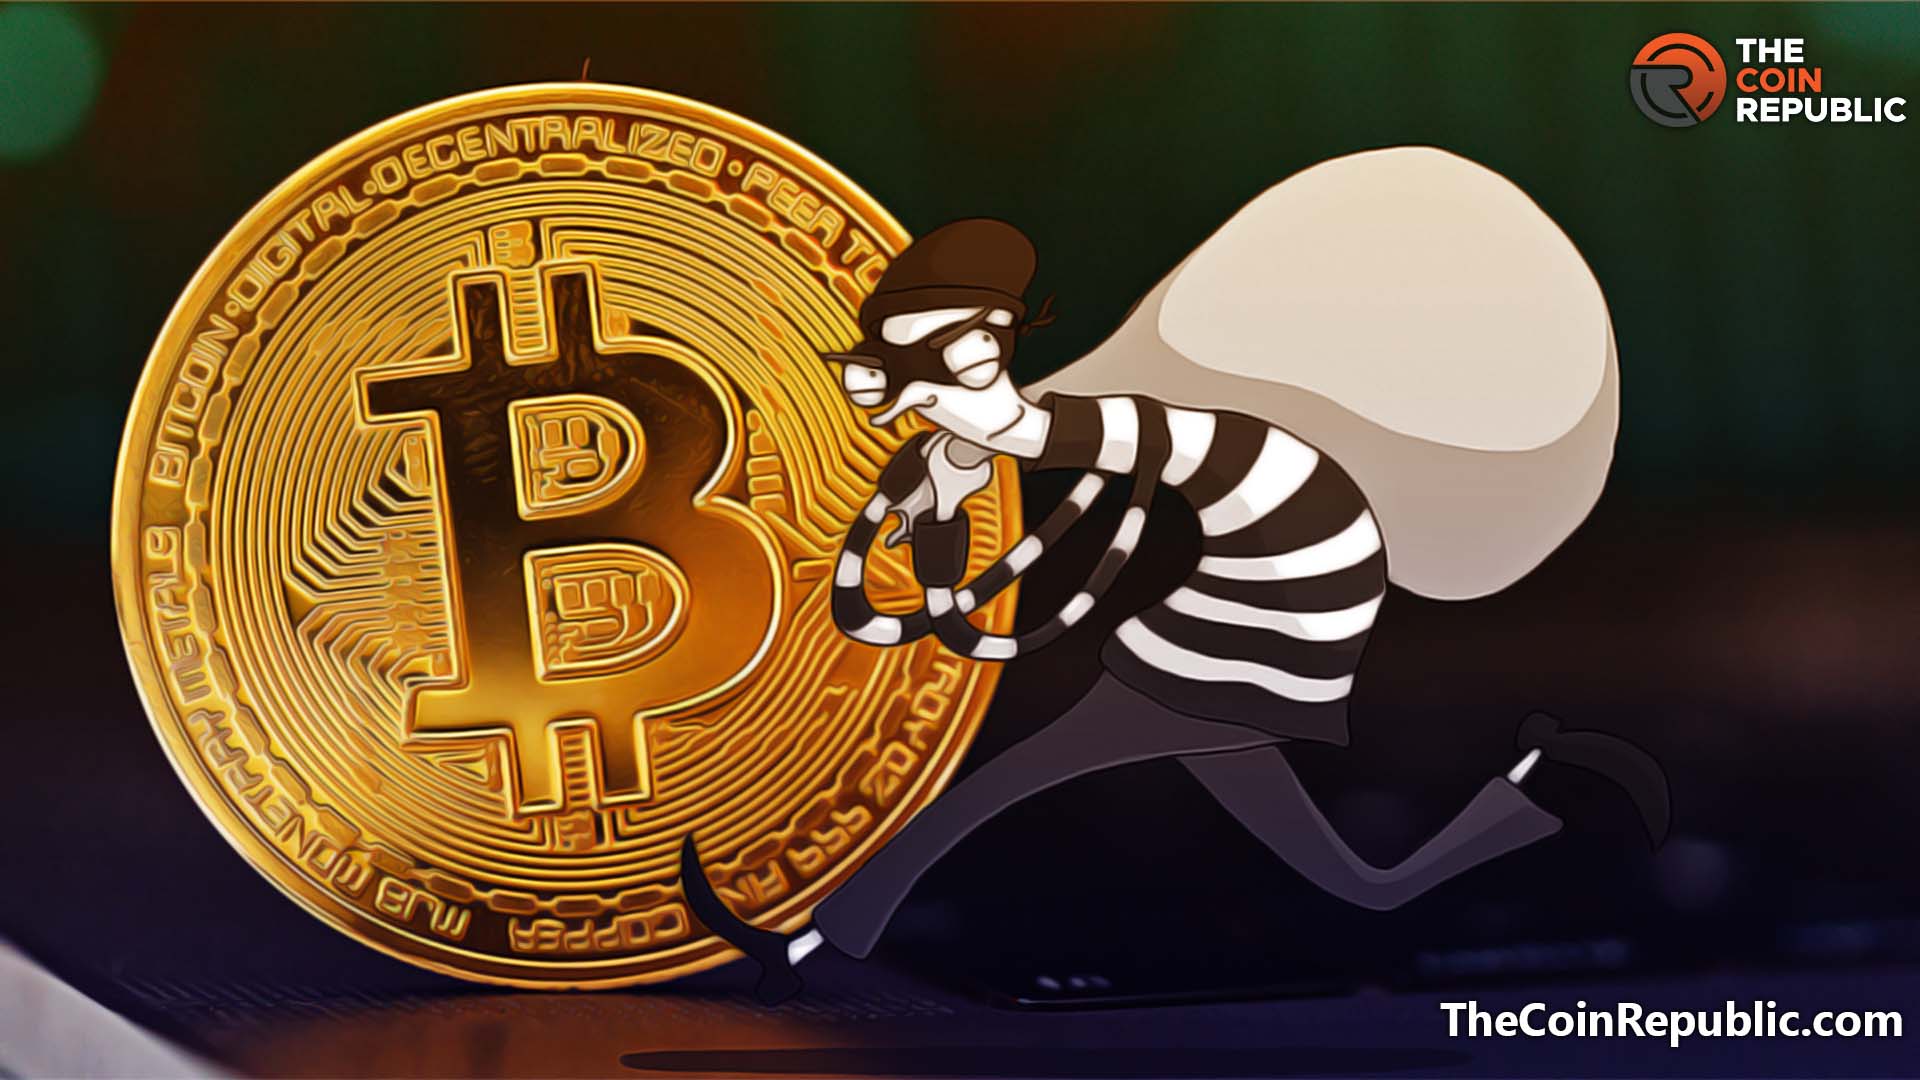 Man Who took 712 BTC Unlawfully Pleads Guilty